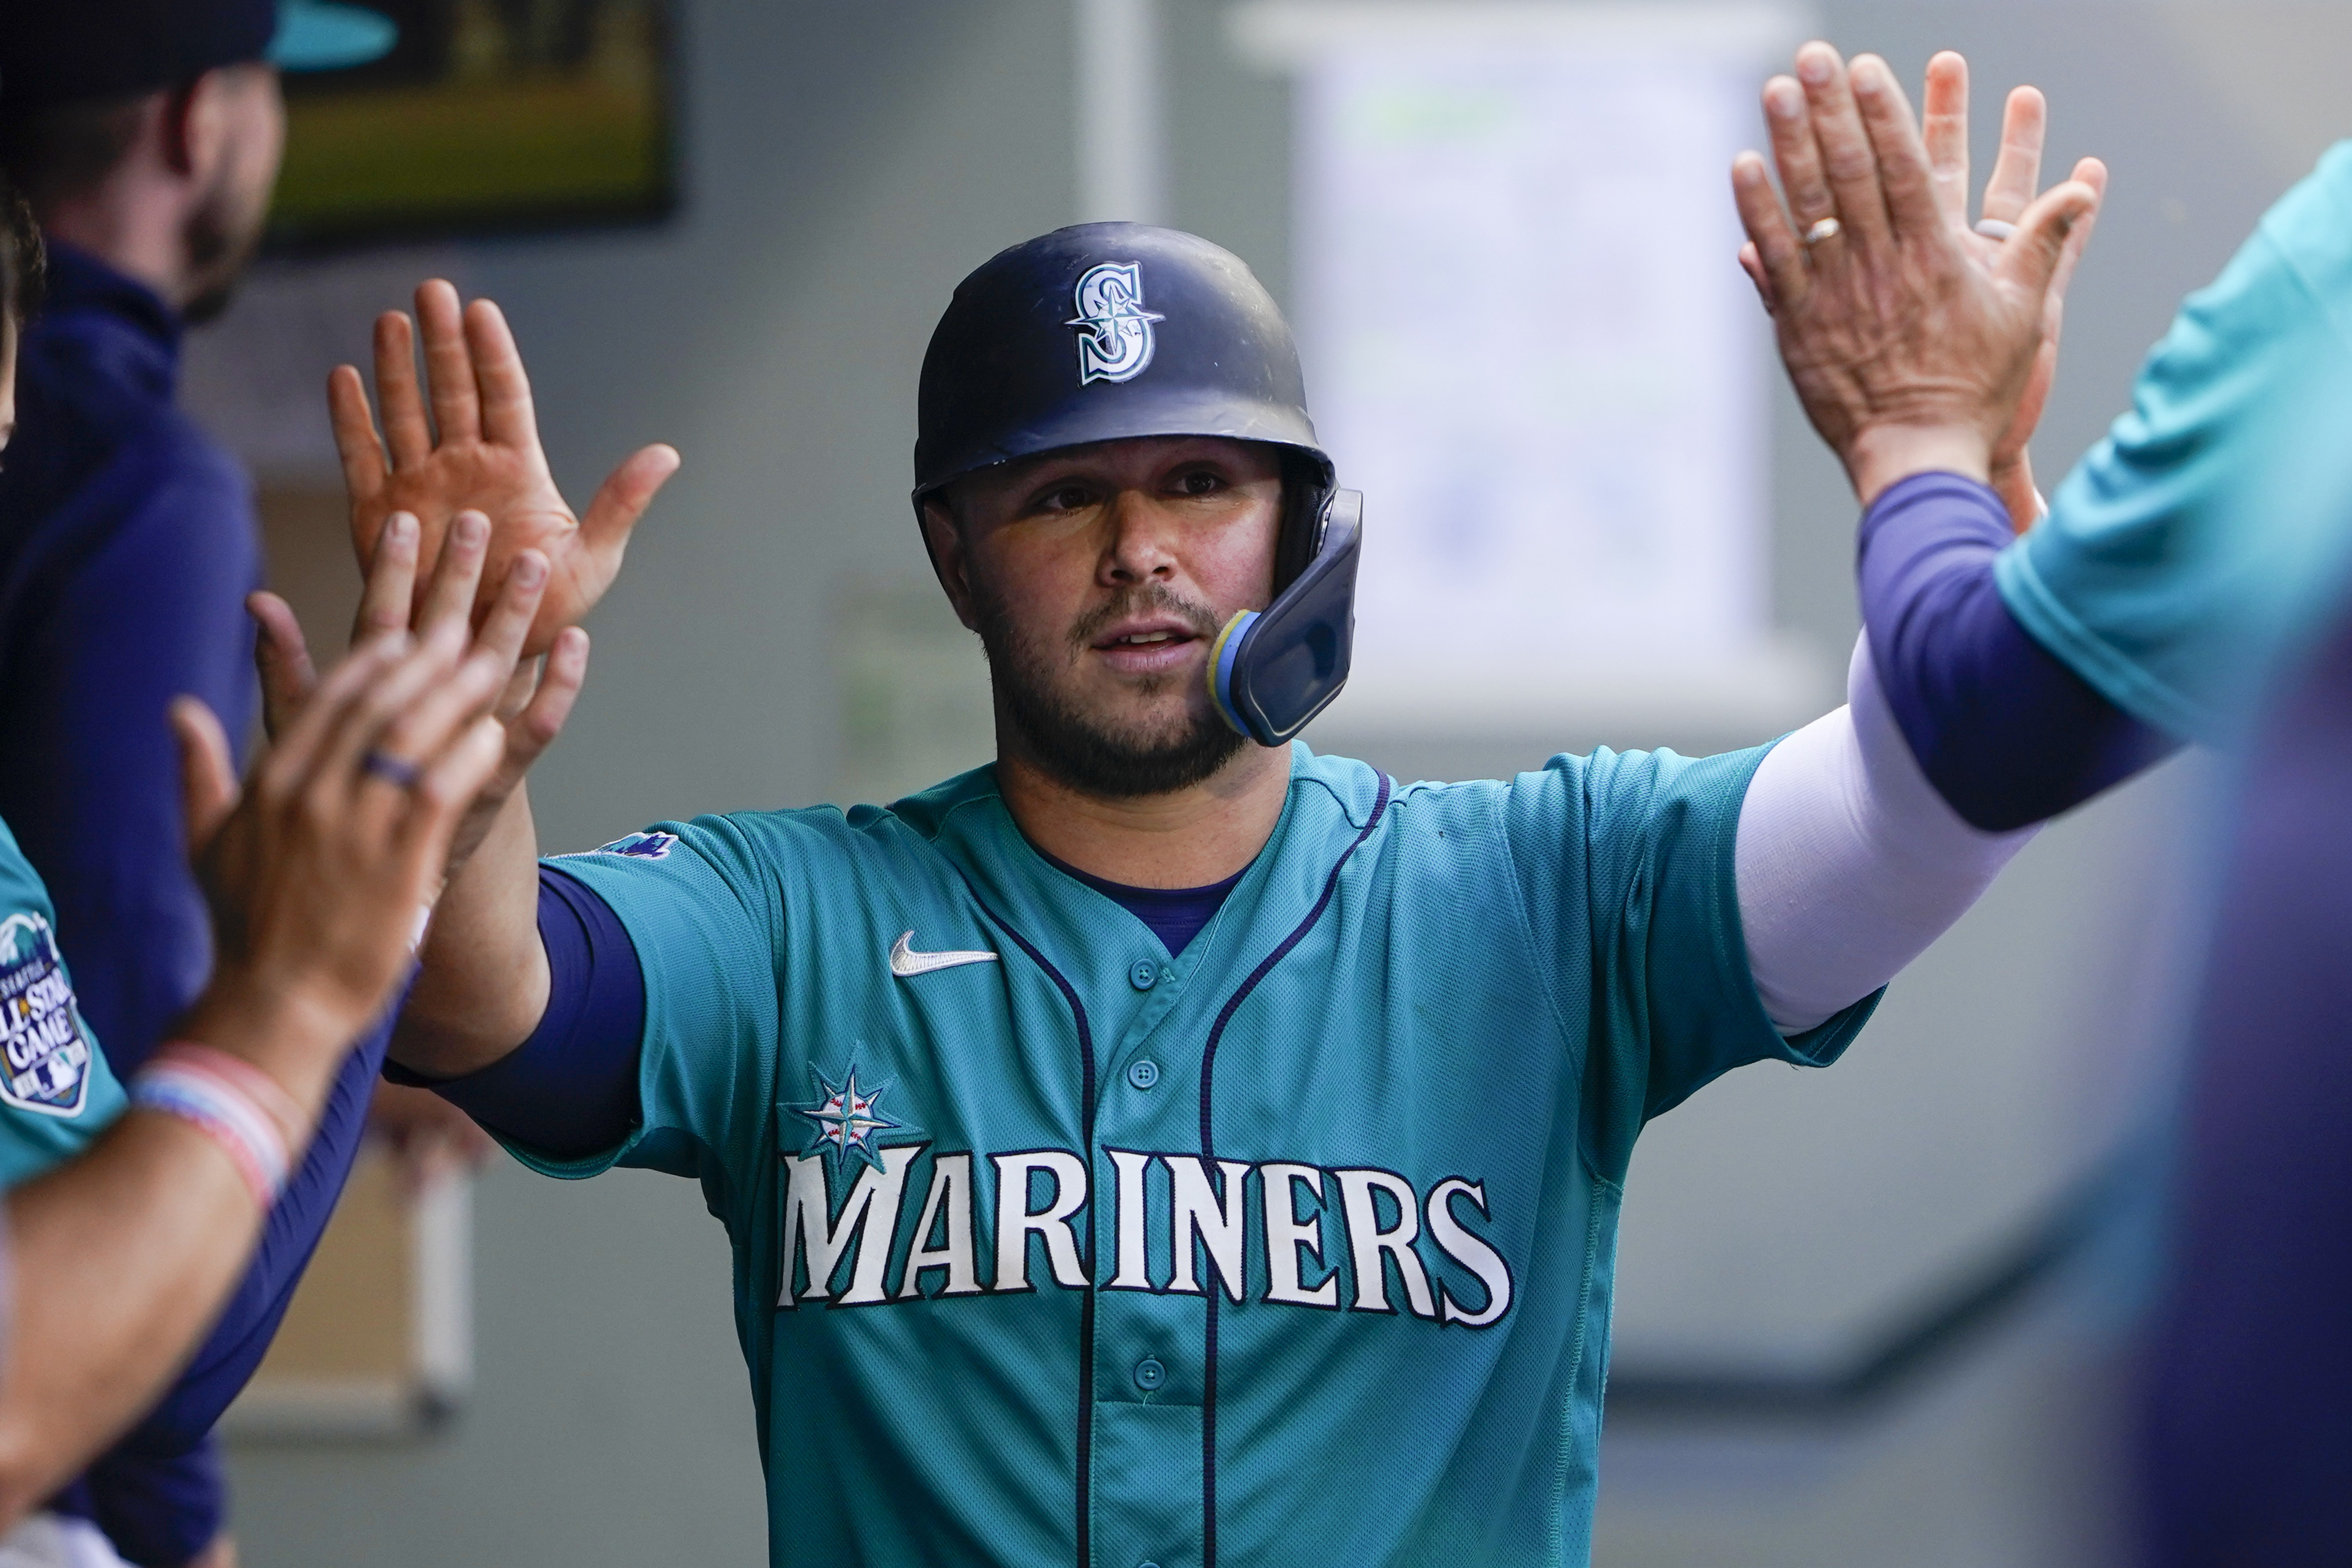 Mariners host Red Sox with both teams chasing wild-card berths